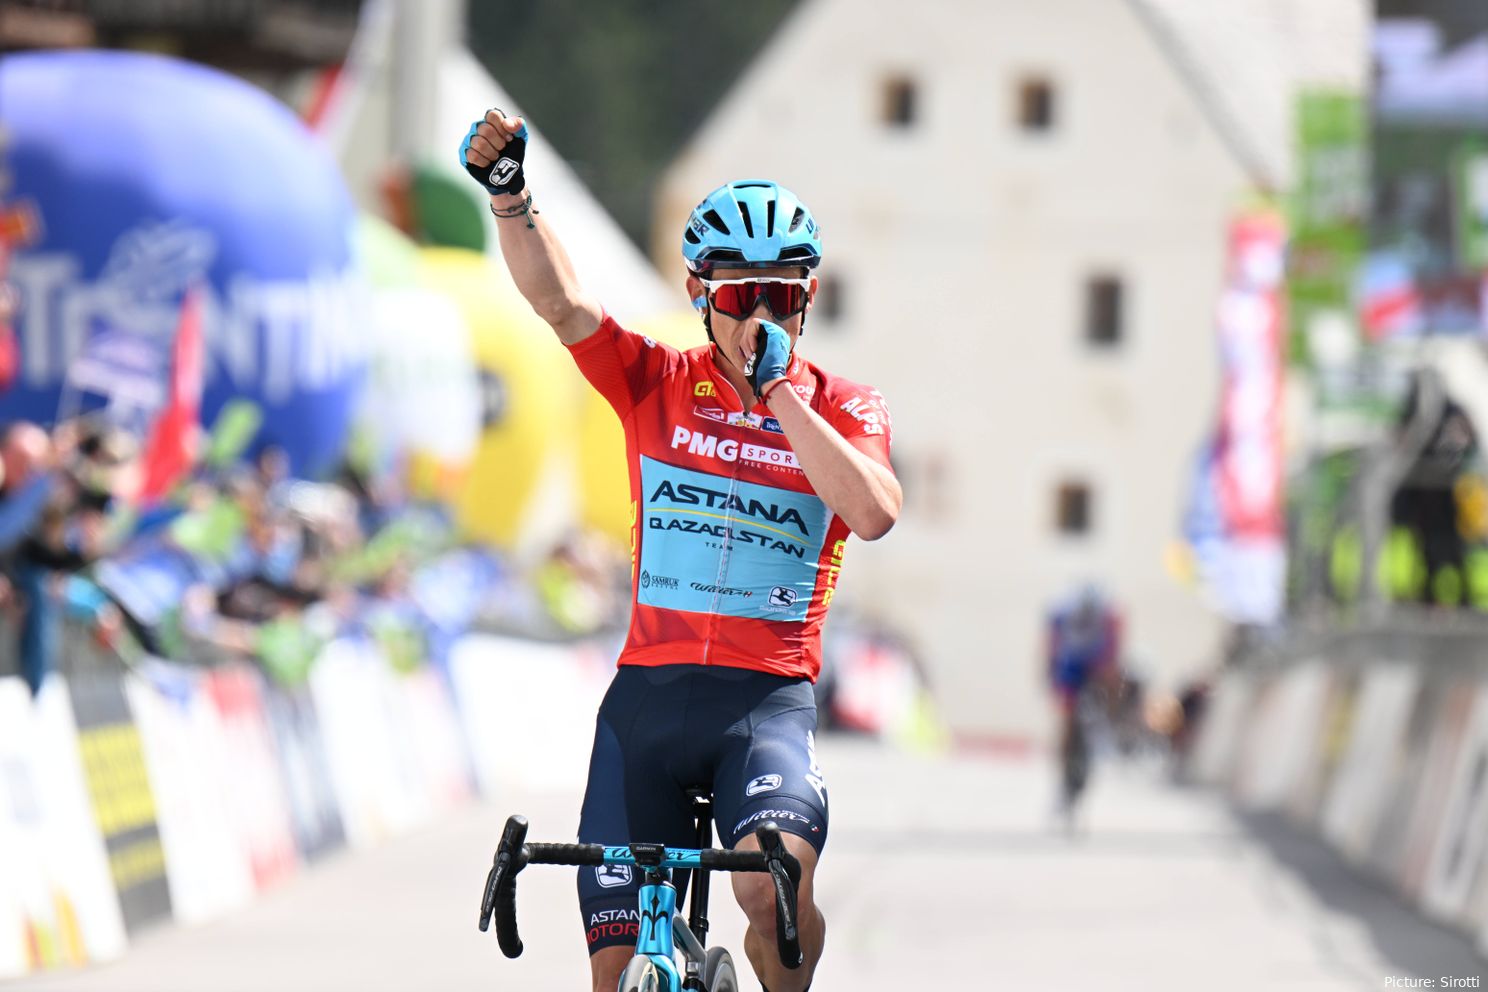 Miguel Ángel López wins at the 2022 Tour of the Alps. @Sirotti